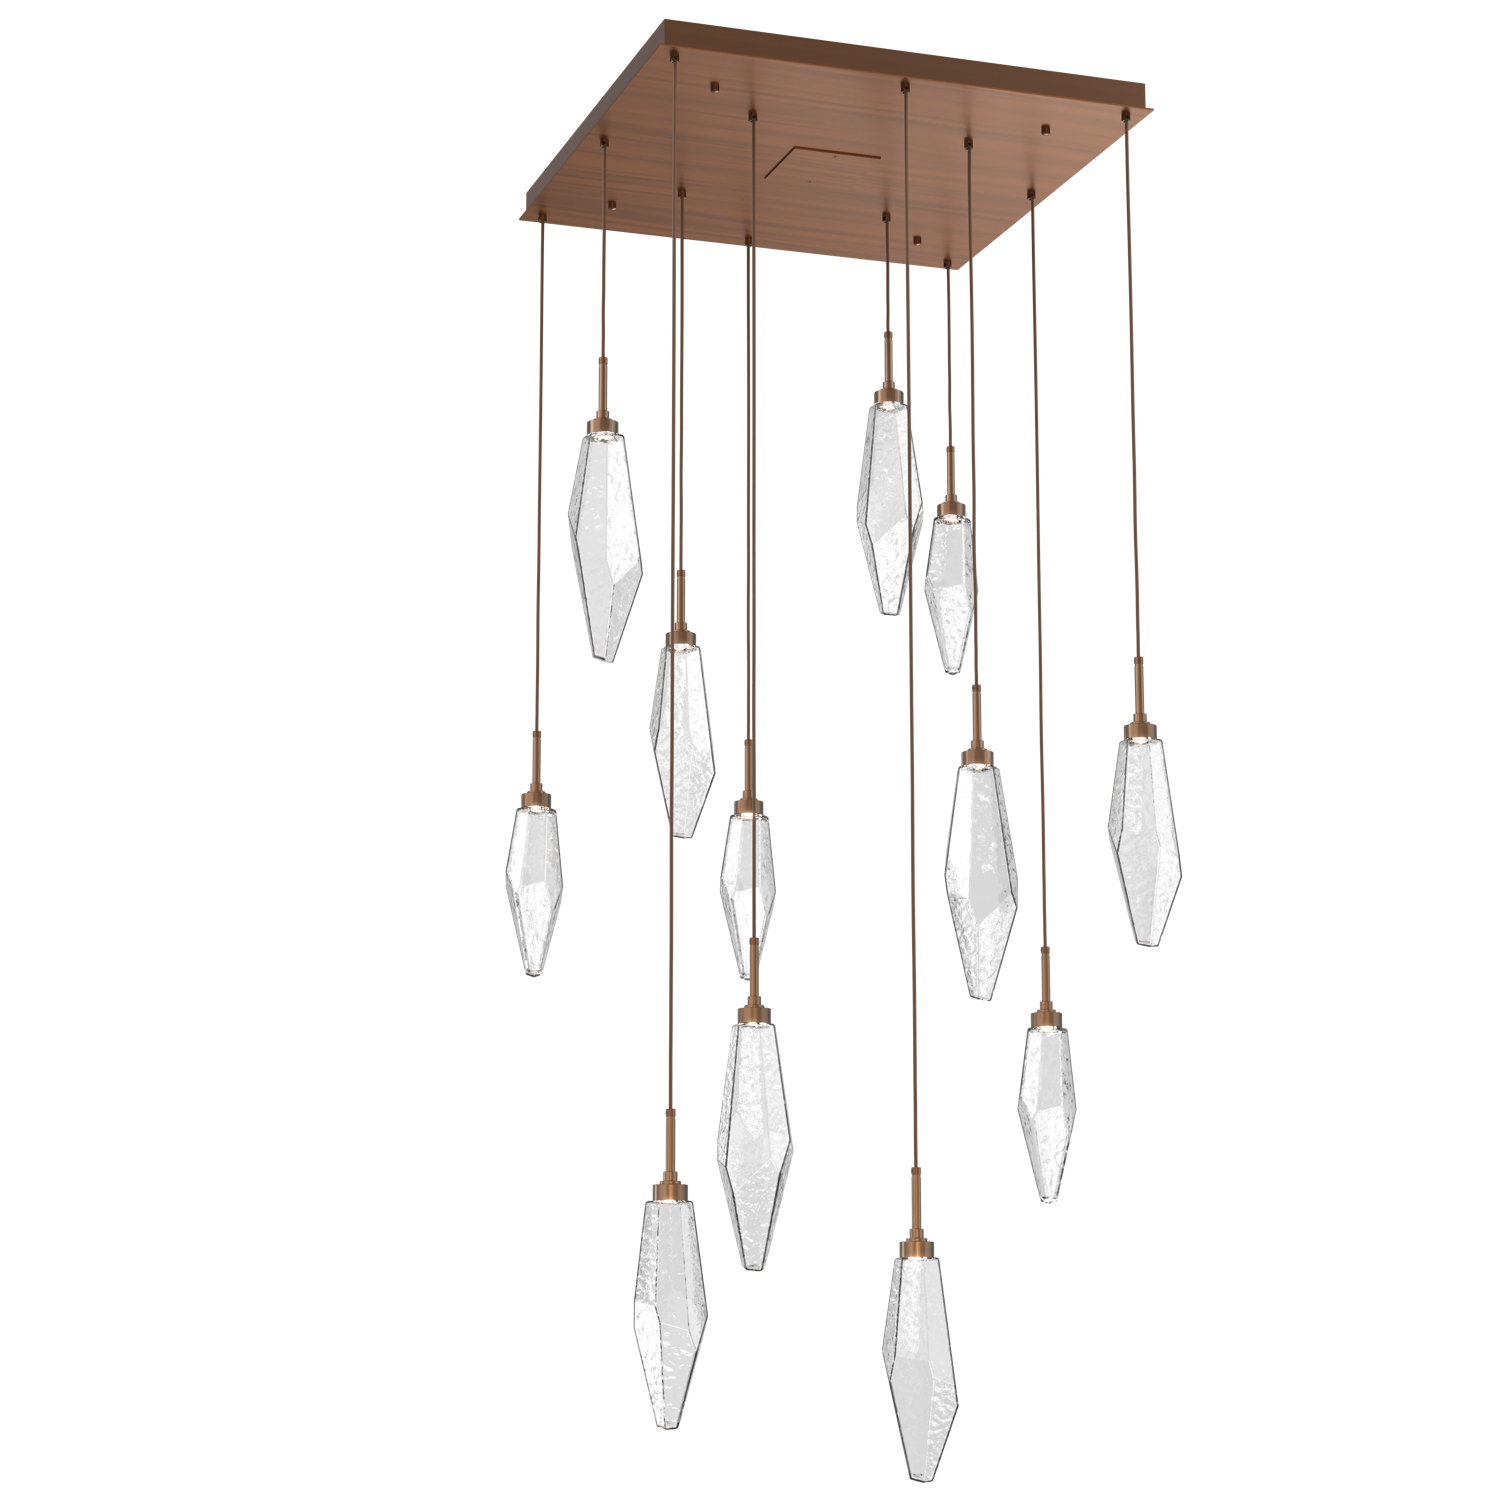 CHB0050-12-RB-CC-Hammerton-Studio-Rock-Crystal-12-light-square-pendant-chandelier-with-oil-rubbed-bronze-finish-and-clear-glass-shades-and-LED-lamping